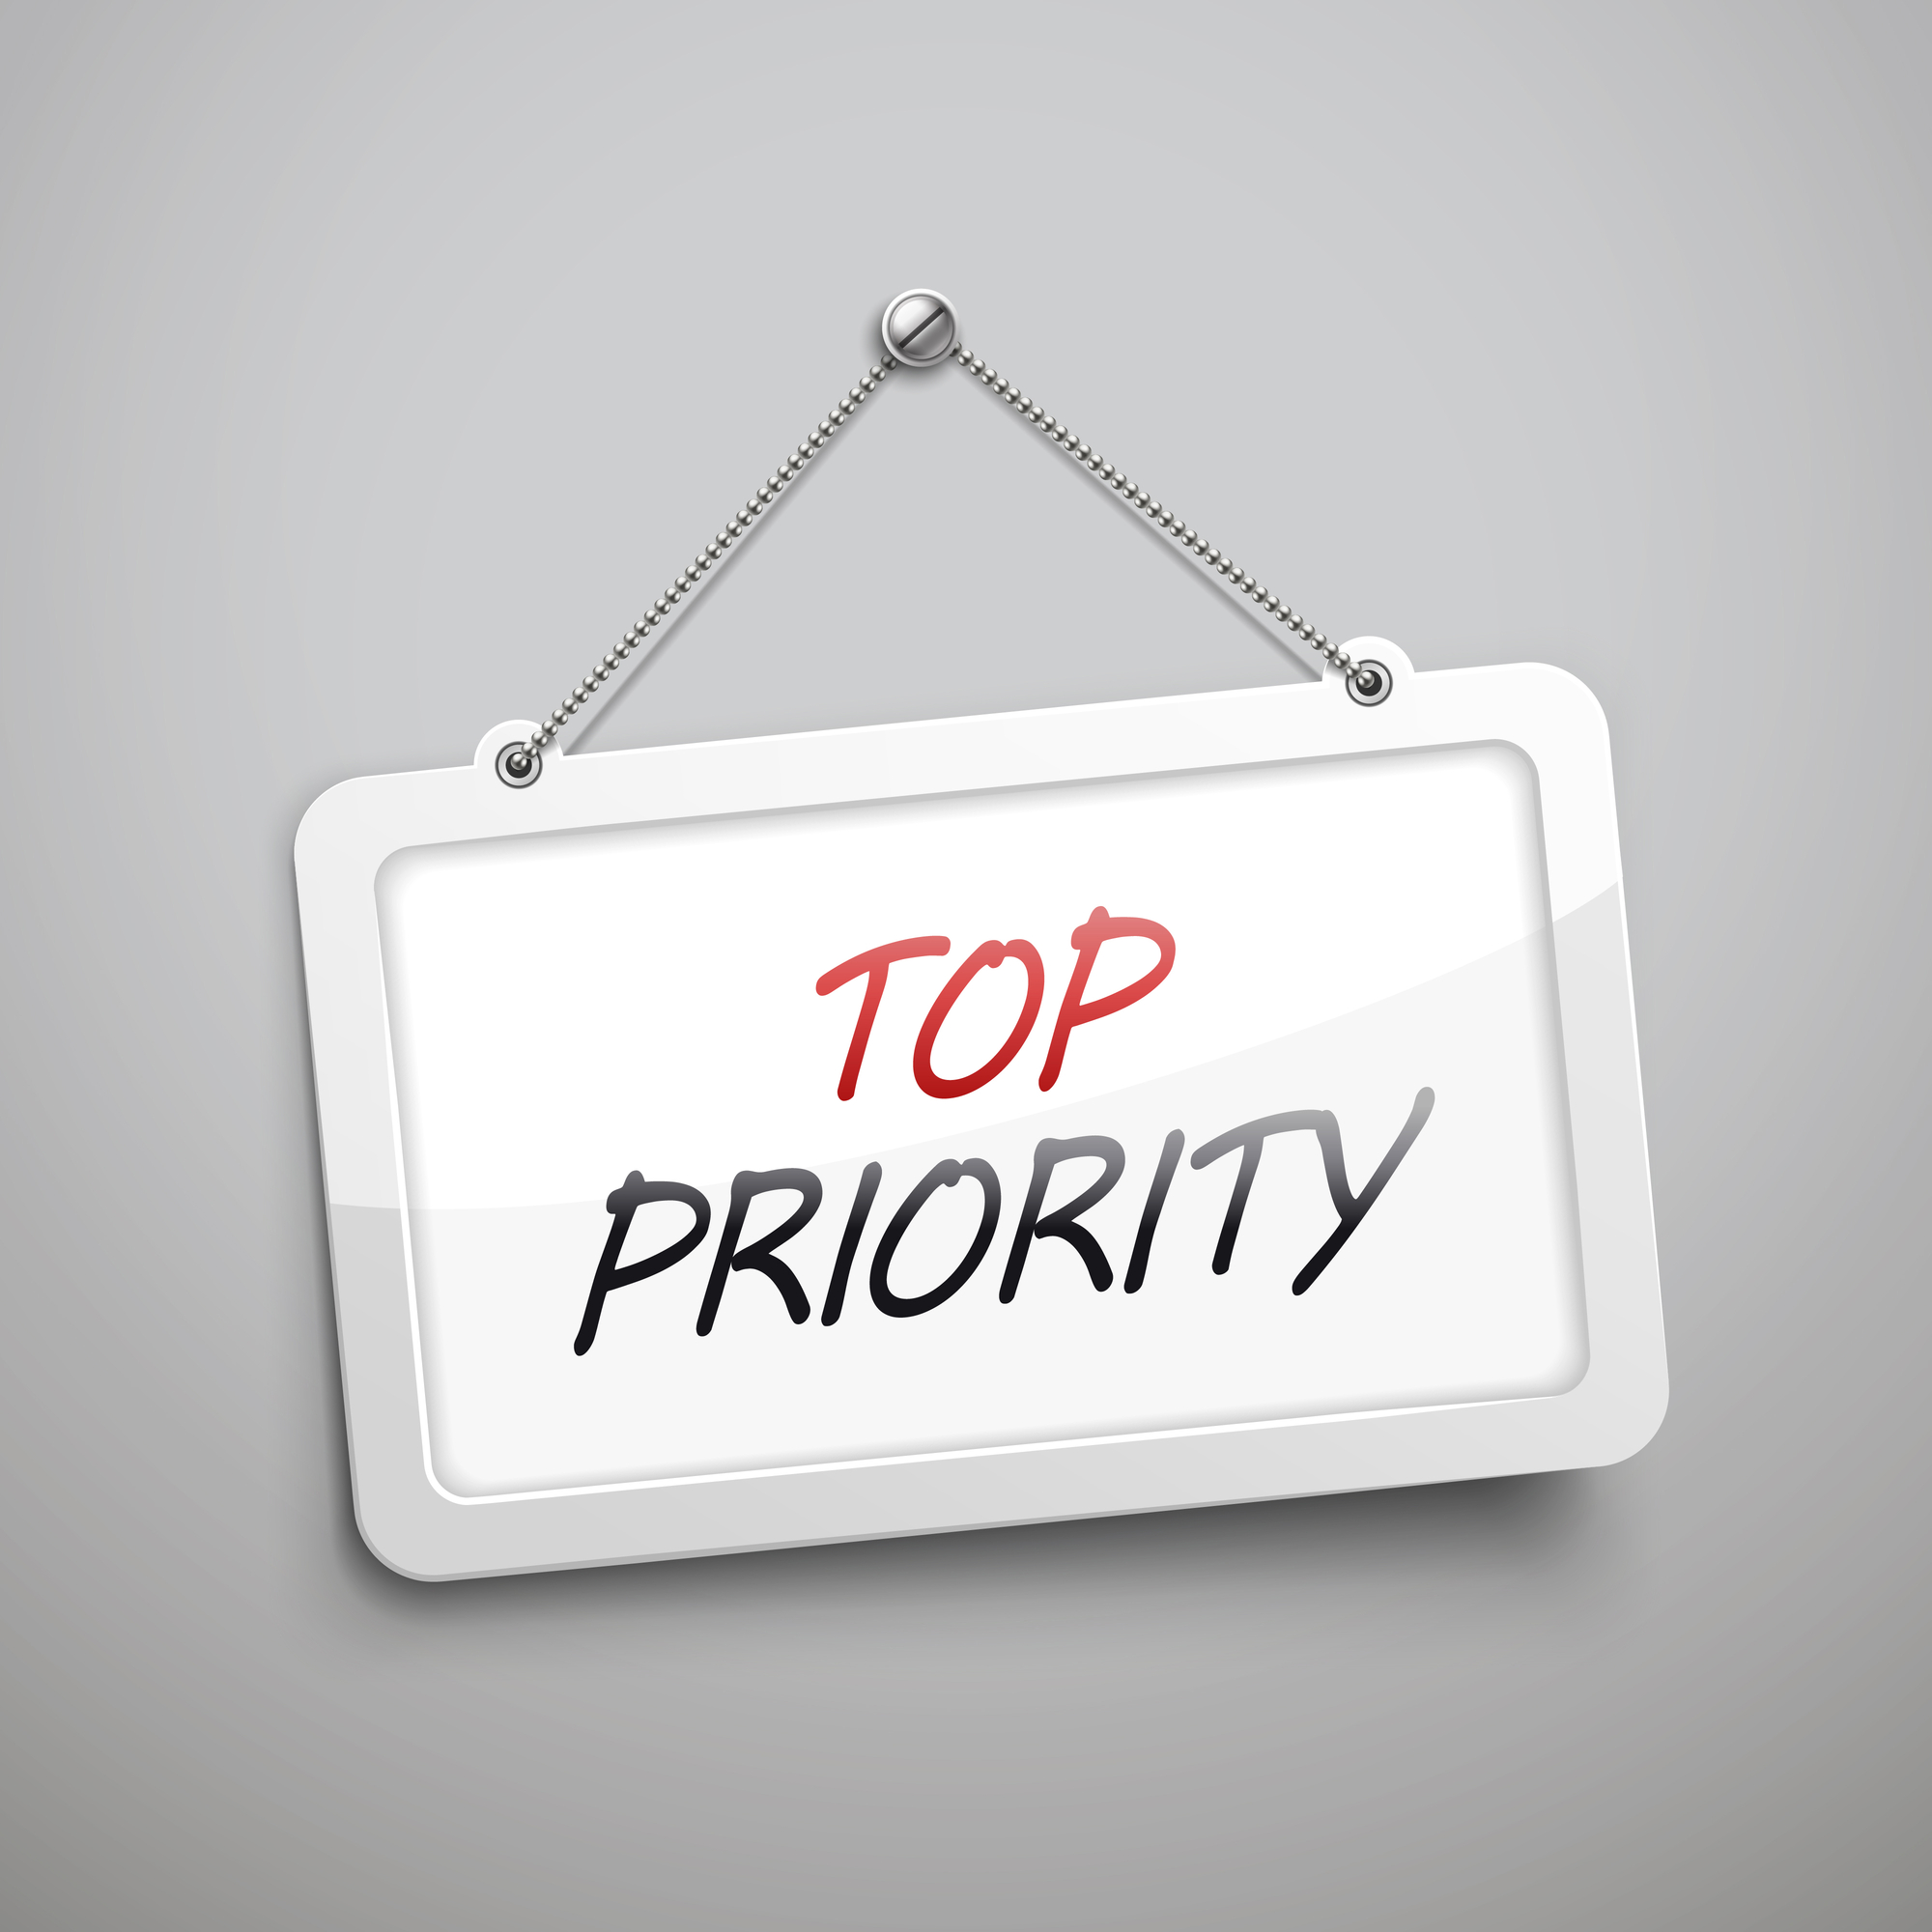 Your highest priority – Networking or Network Building?